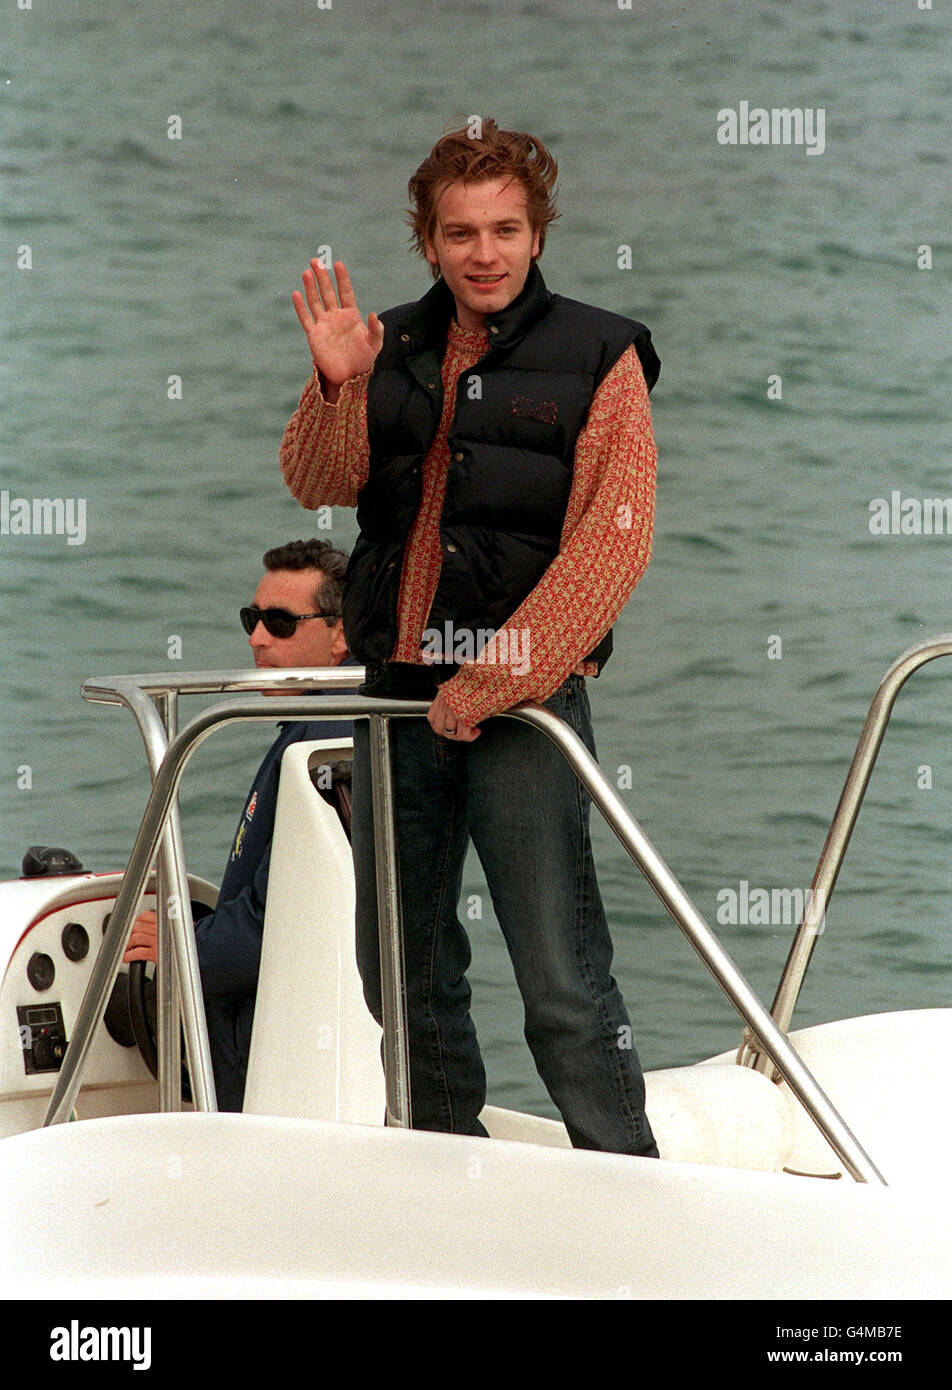 Ewan Mcgregor arrives at the Majestic Beach Pier on a speedboat for a photocall for his new movie 'Nora' in which he takes a co-producer role produced through his production company Natural Nylon during the Cannes Film Festival 1999 in France. Stock Photo